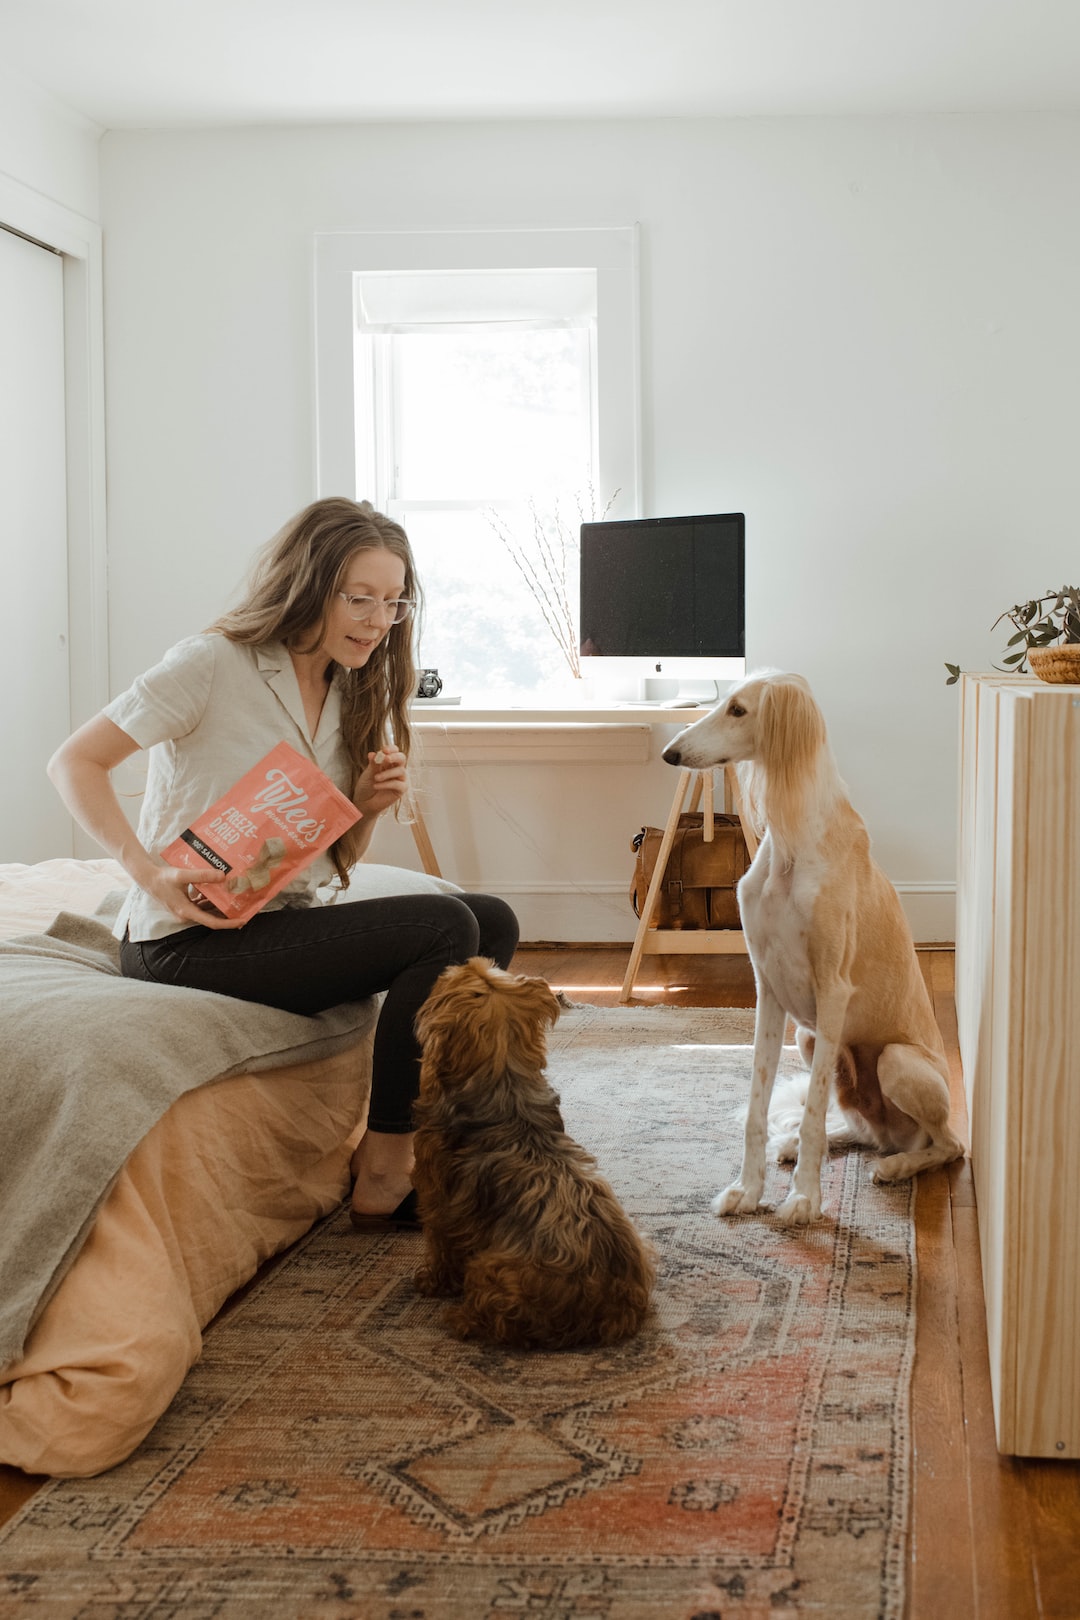 Rental Policy: Should You Allow Pets in a Rental Property